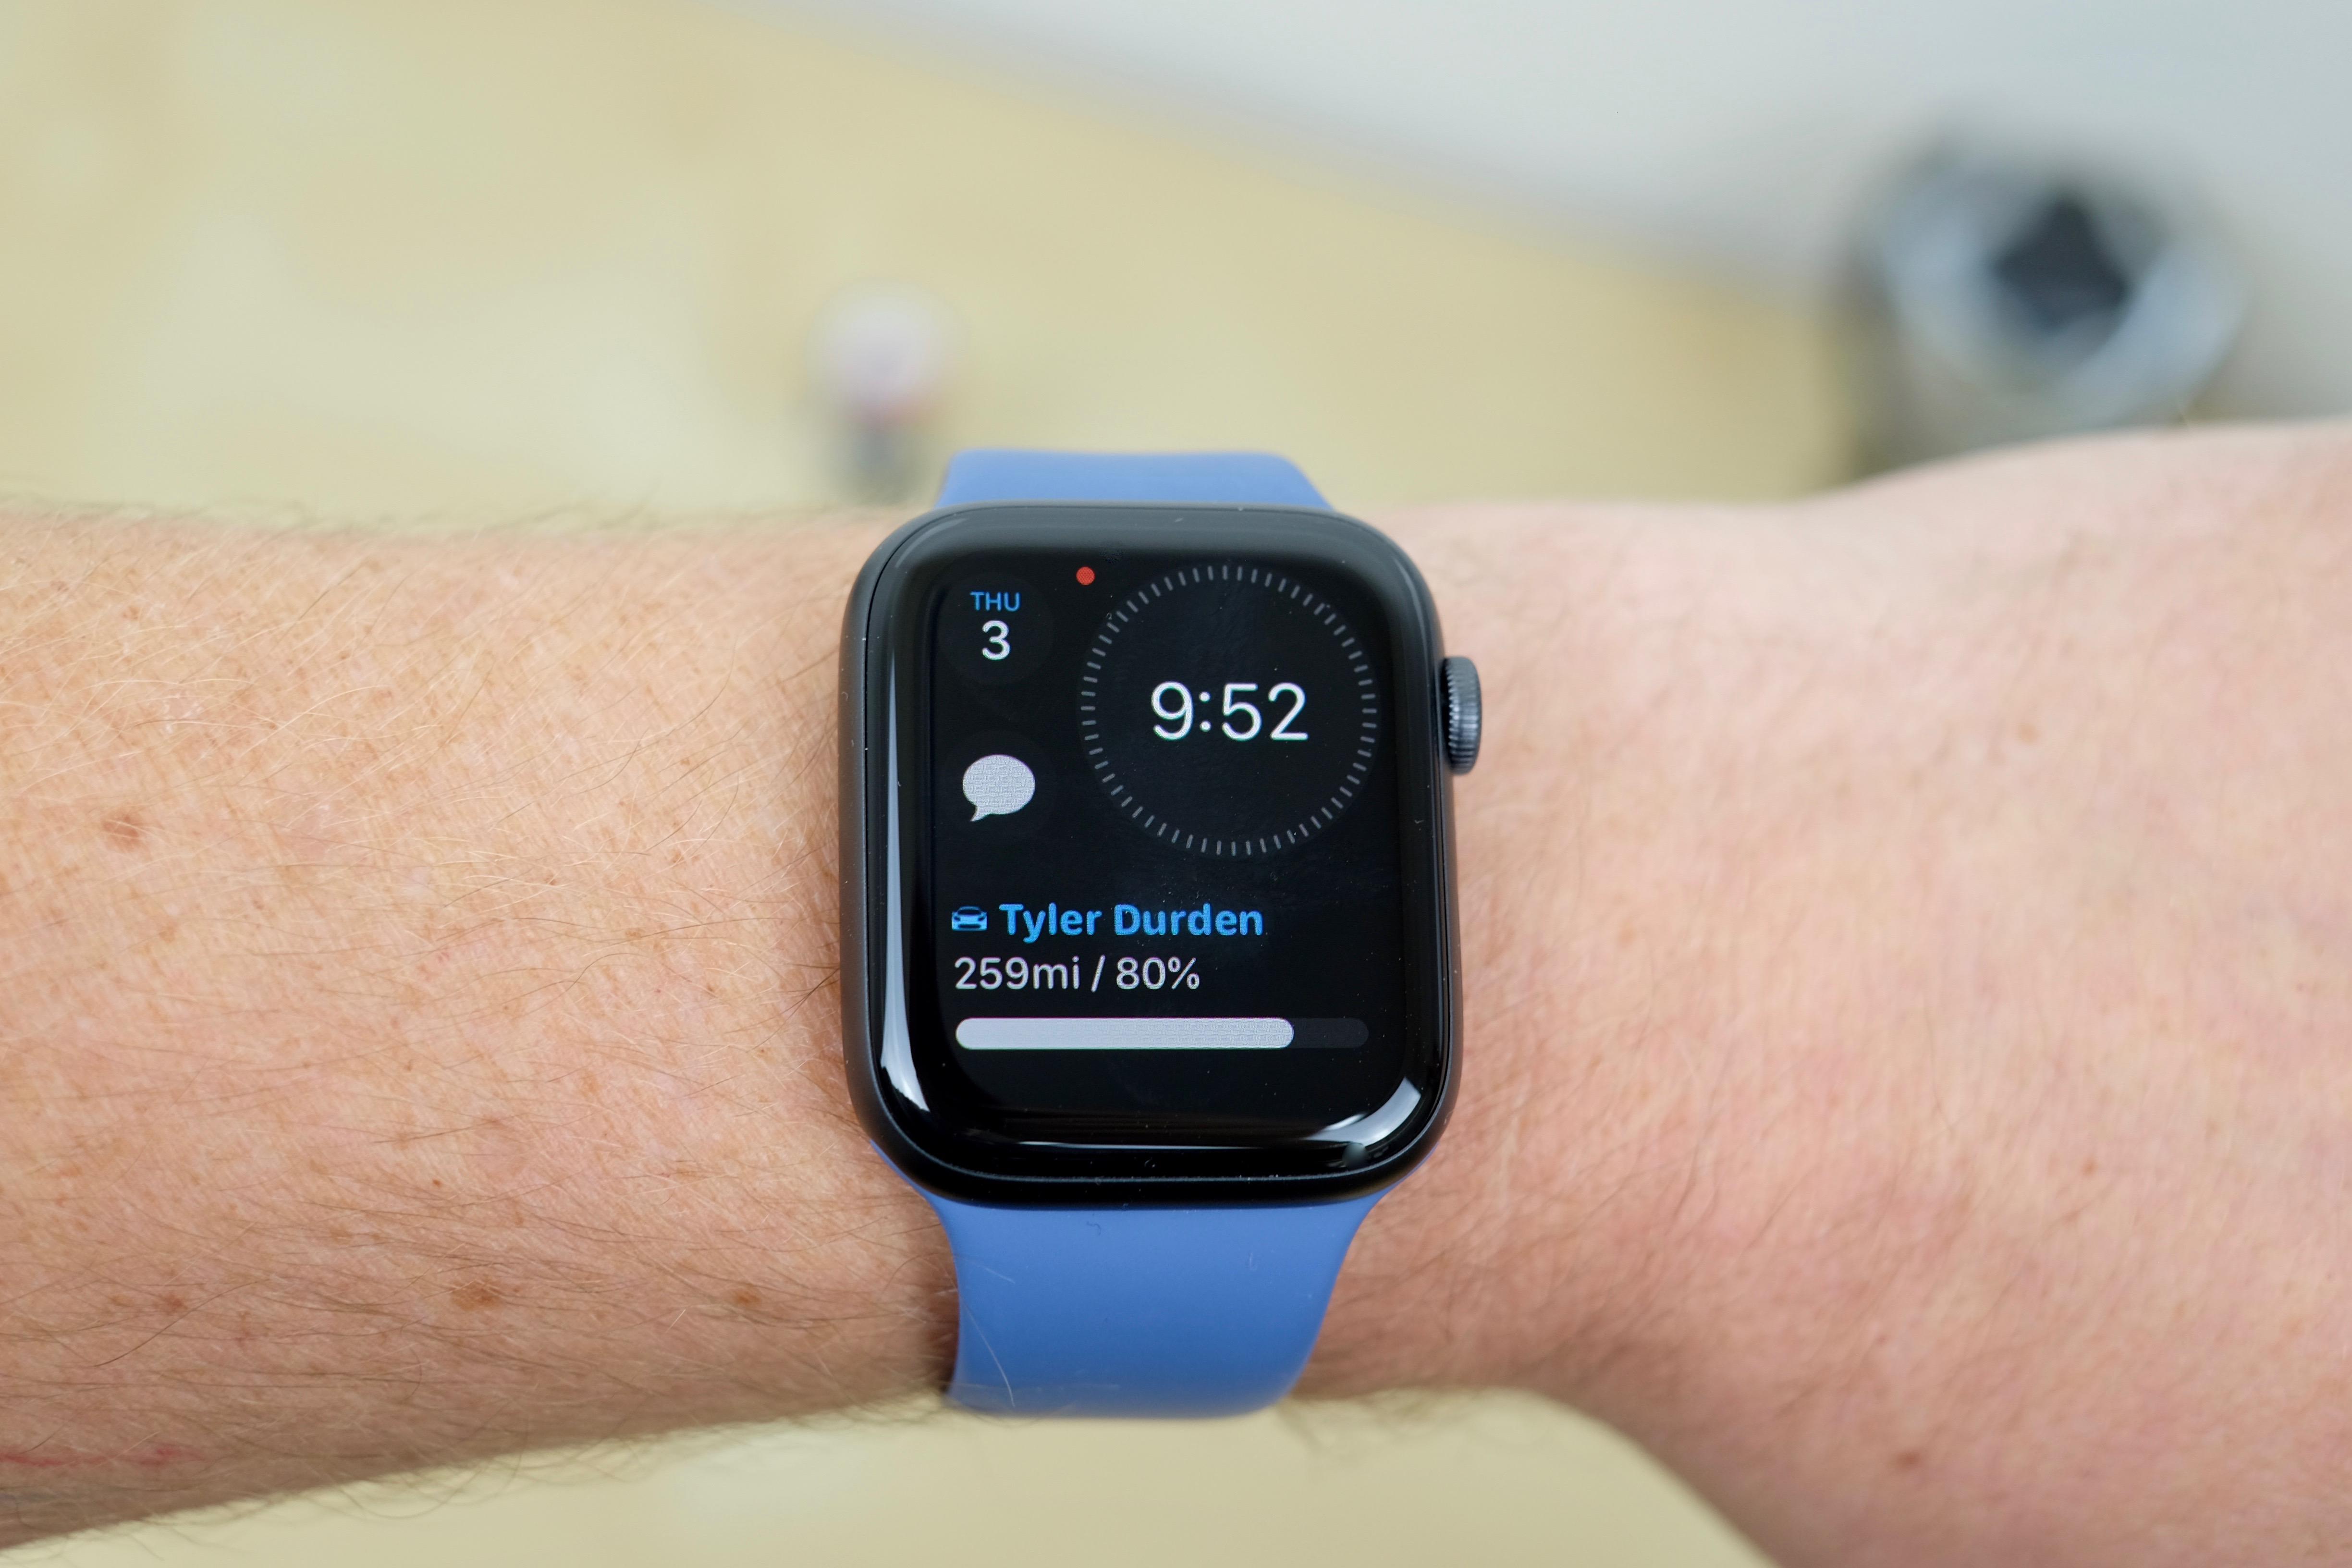 Apple Watch Series 5 review: This is the watch I've been waiting for